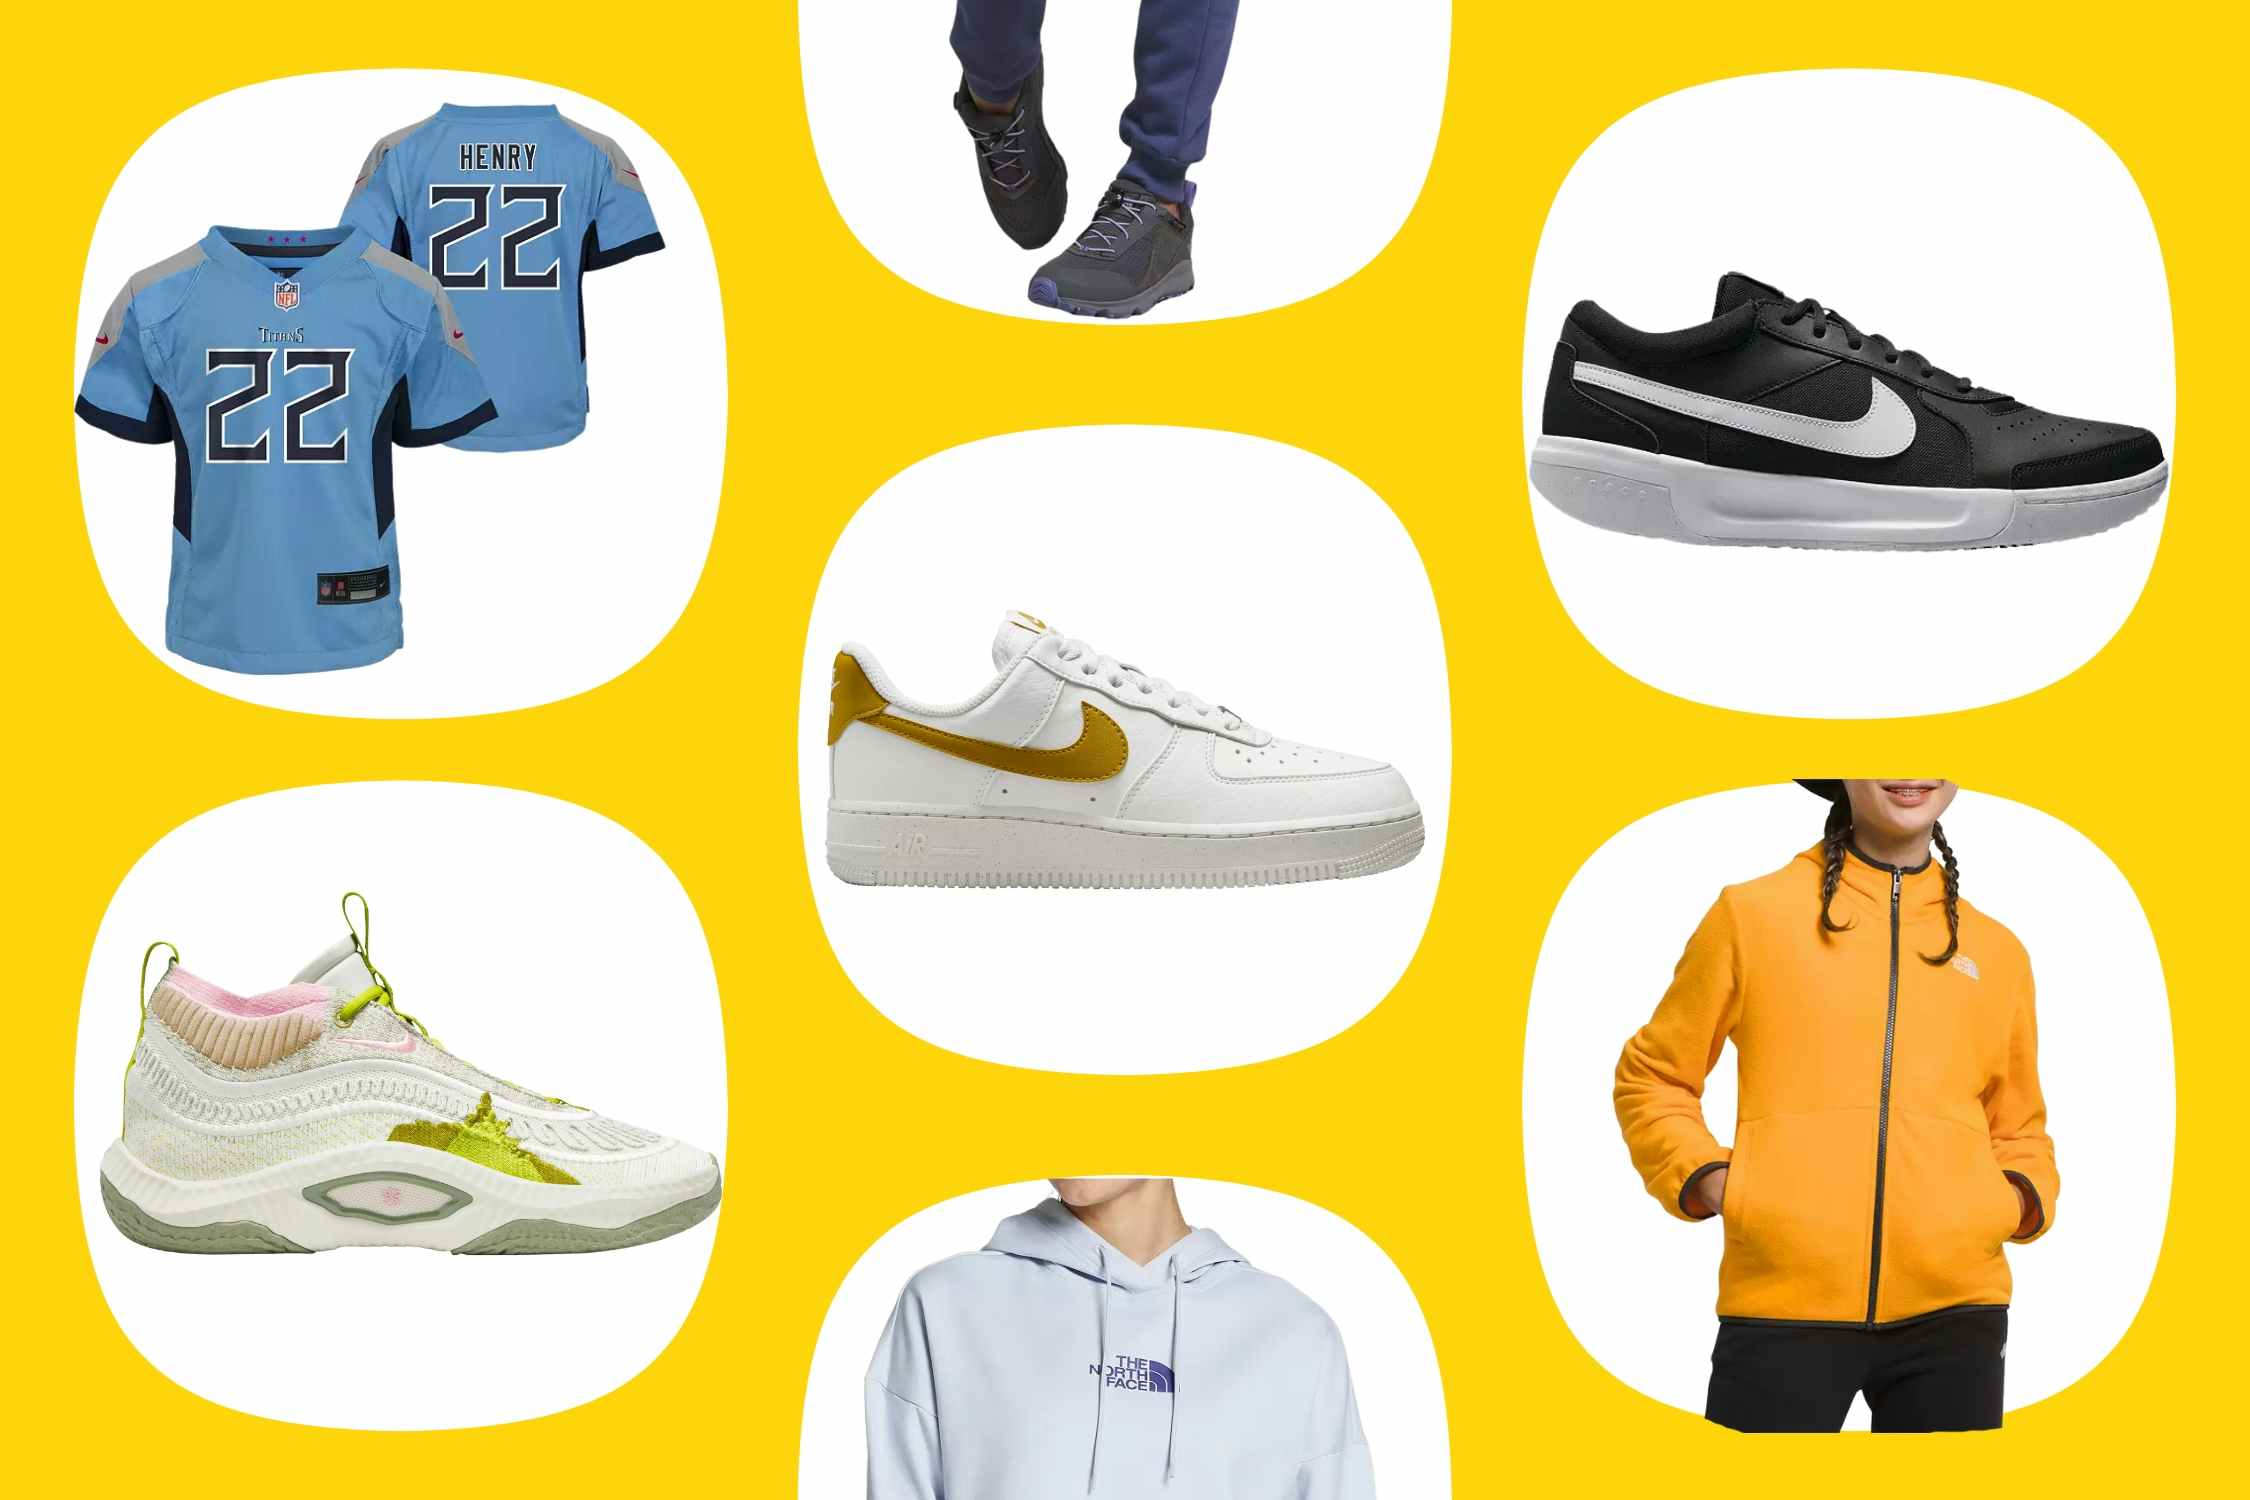 $9 NFL Jersey, $50 Nike Air Force Shoes, and More at Dick's Sporting Goods